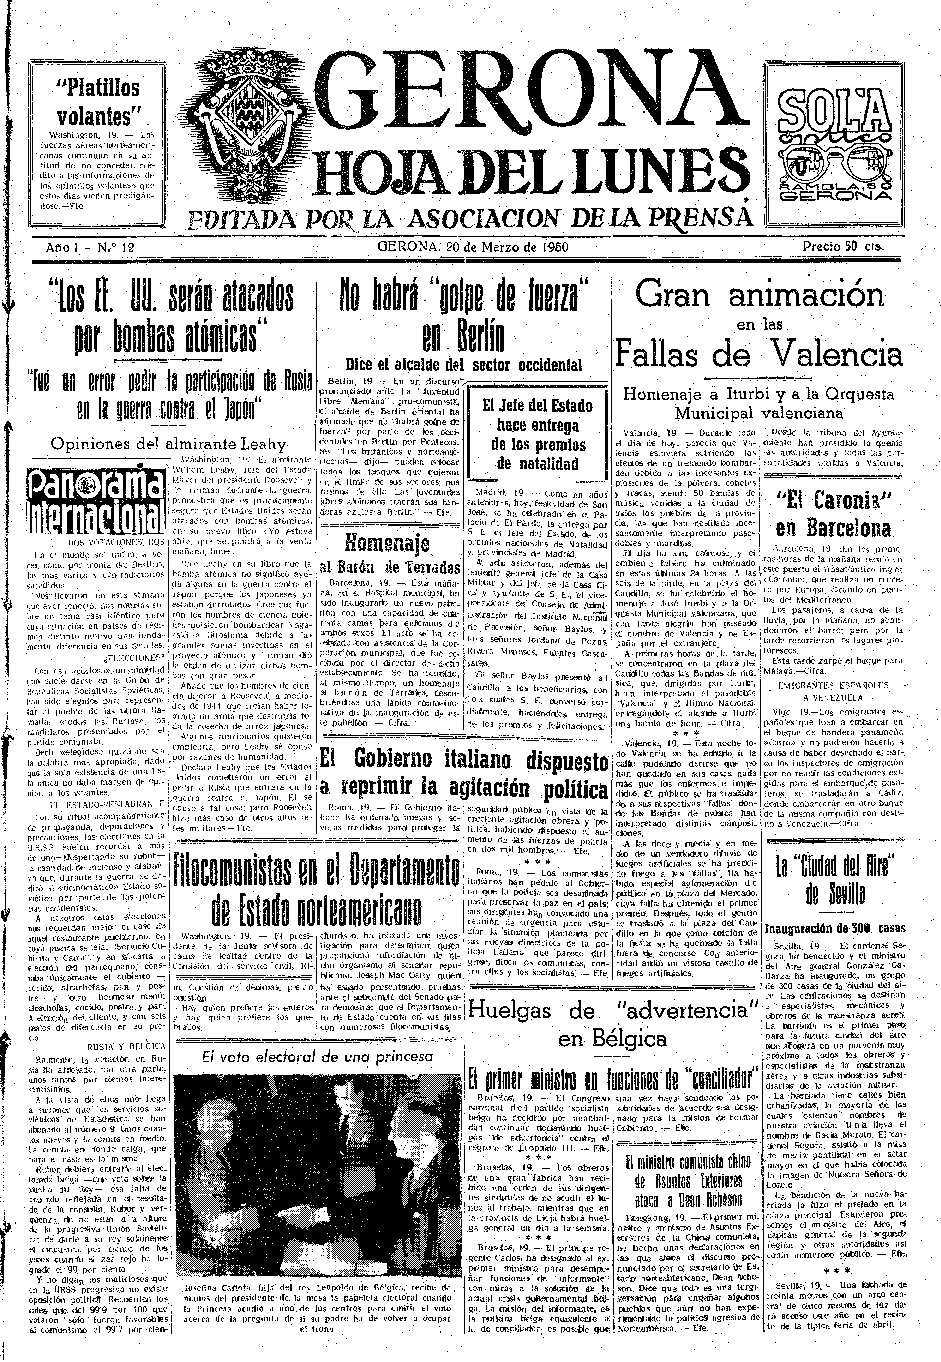 Hoja del Lunes. 20/3/1950. [Issue]